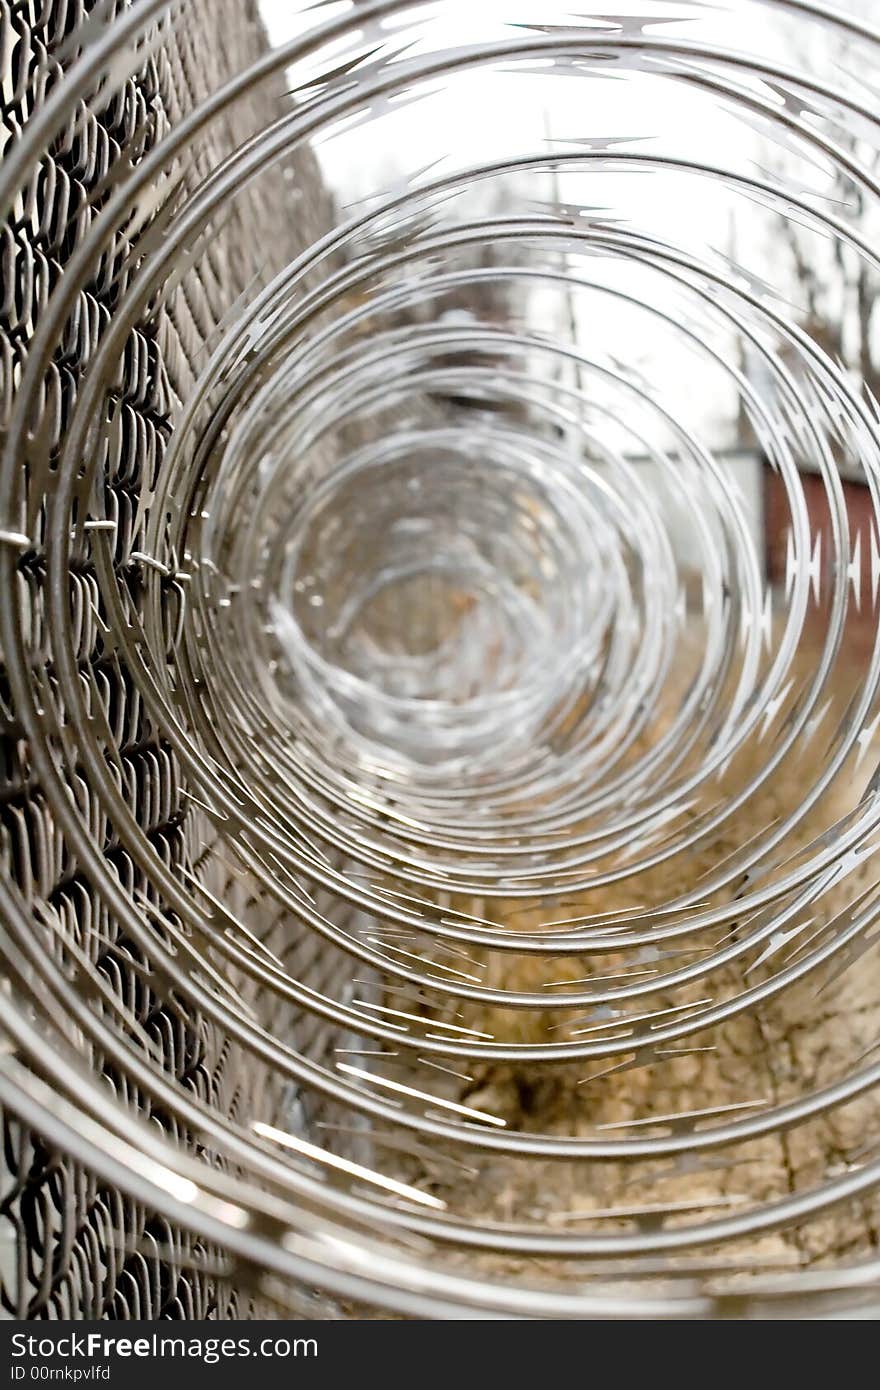 A view down the center of coils of razor wirre mounted to a fence. A view down the center of coils of razor wirre mounted to a fence